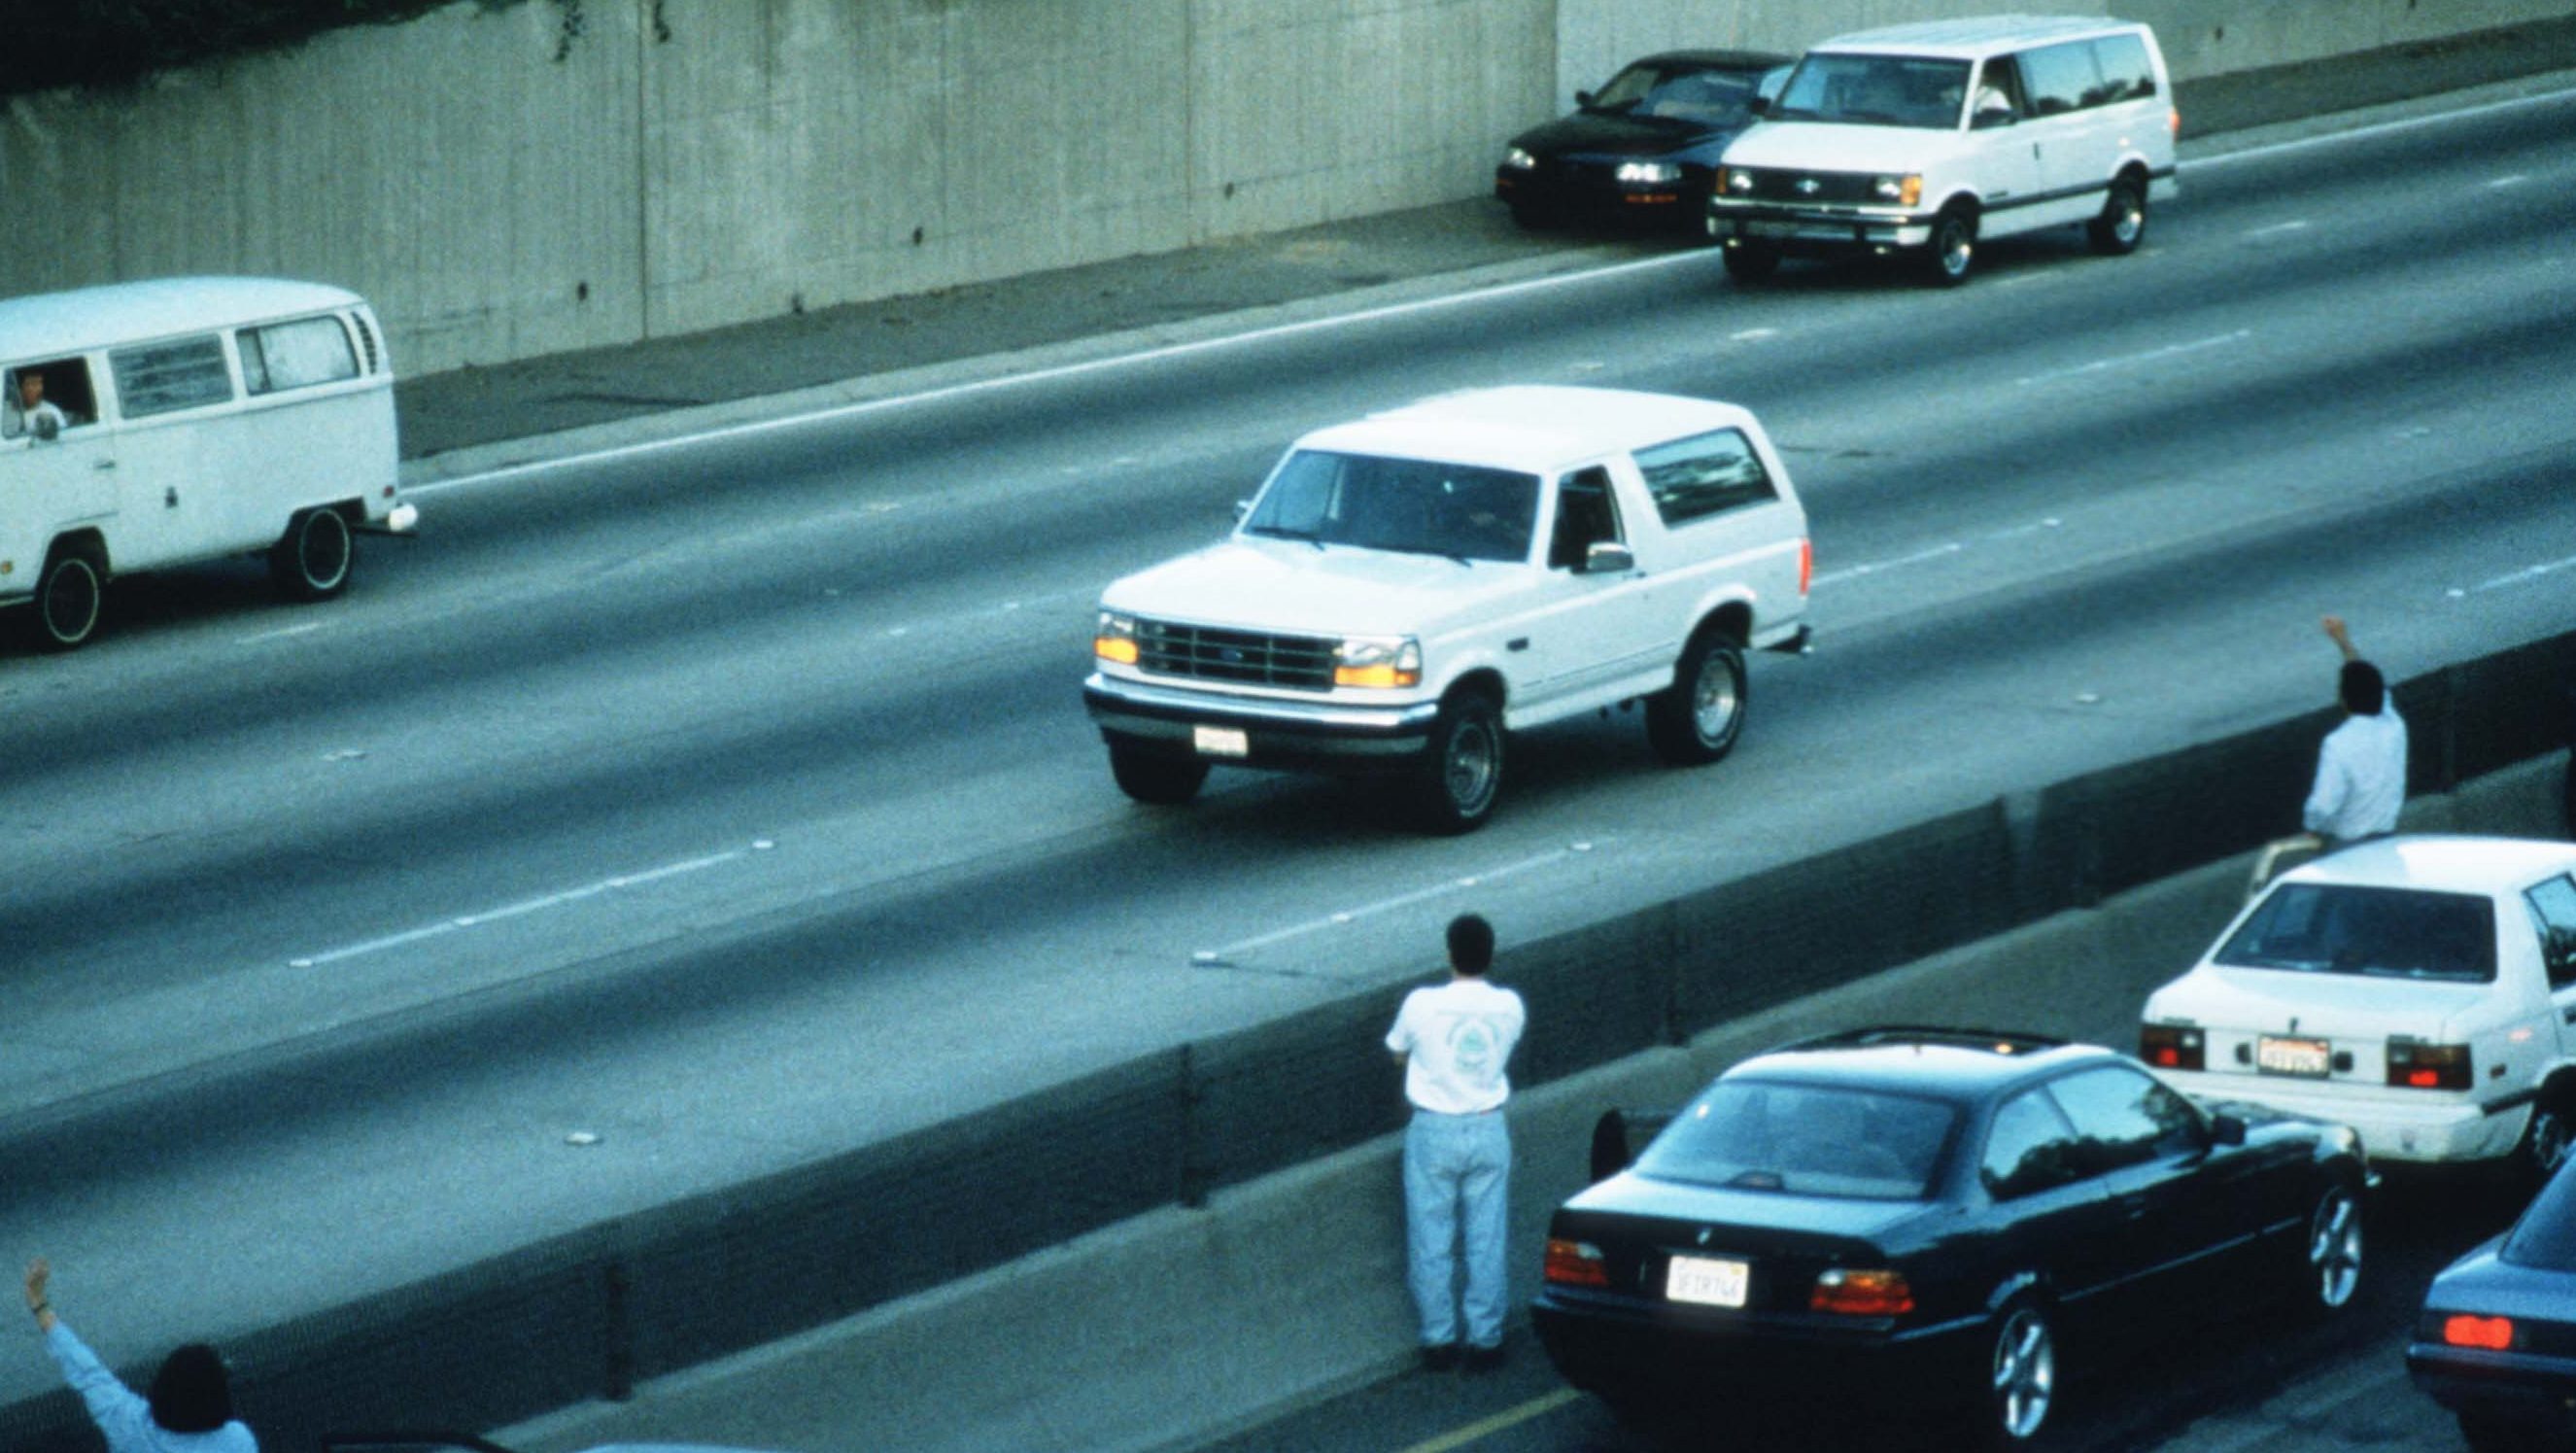 Chasing justice: What is owed in the complex legacy of O.J. Simpson?